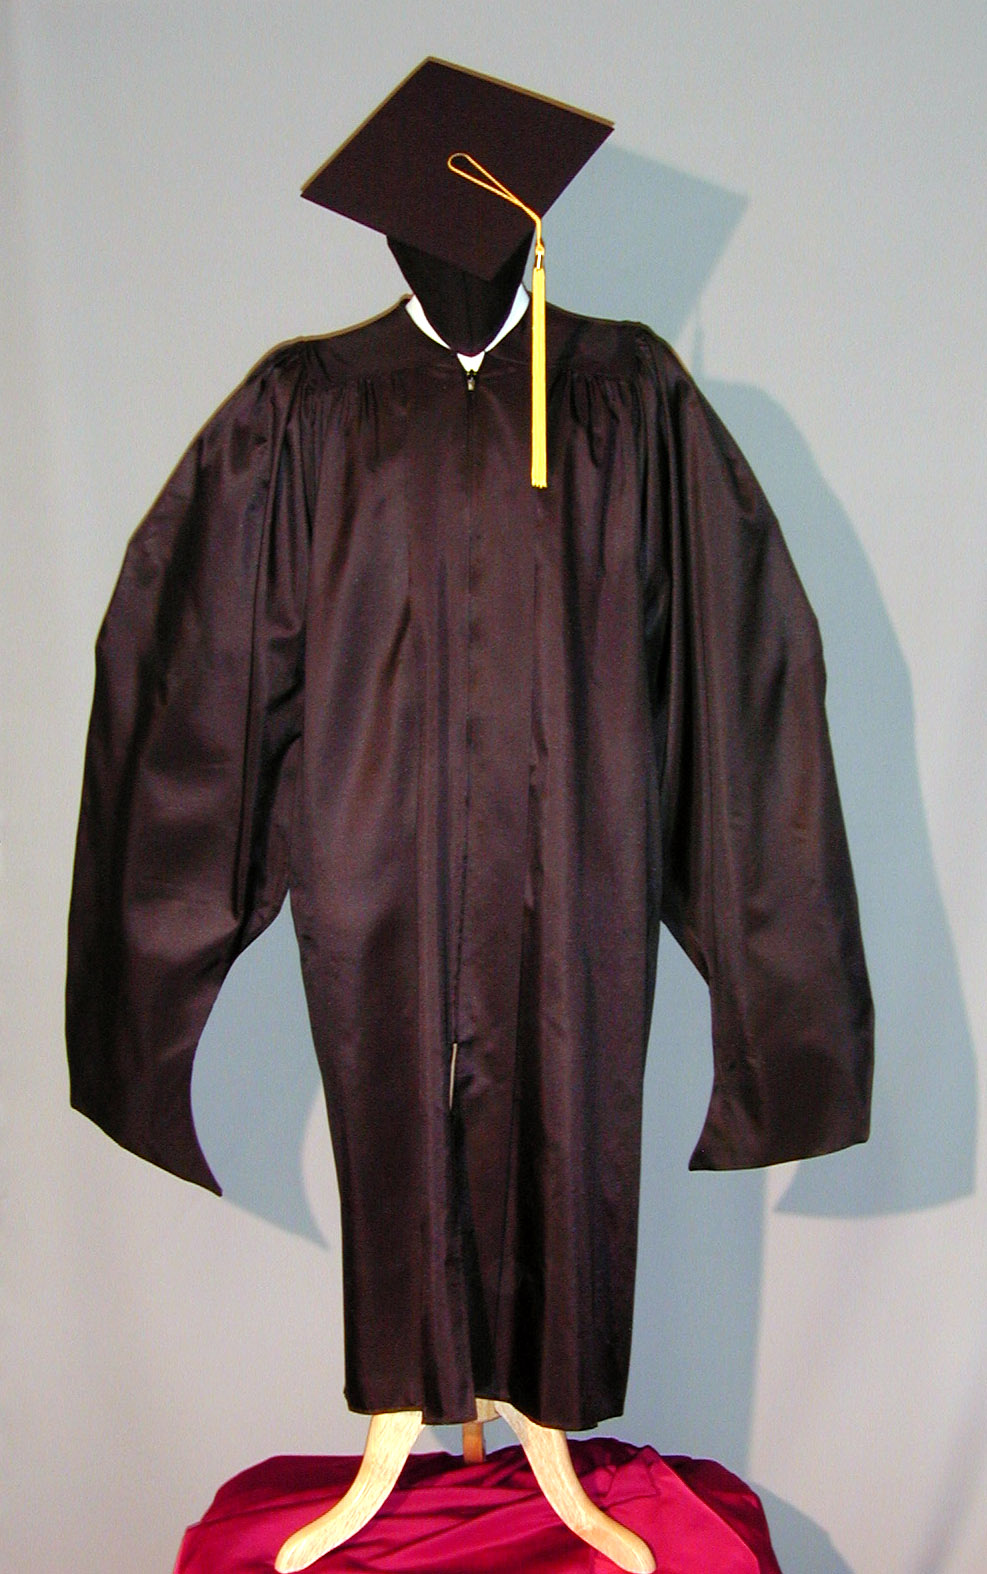 masters degree cap and gown